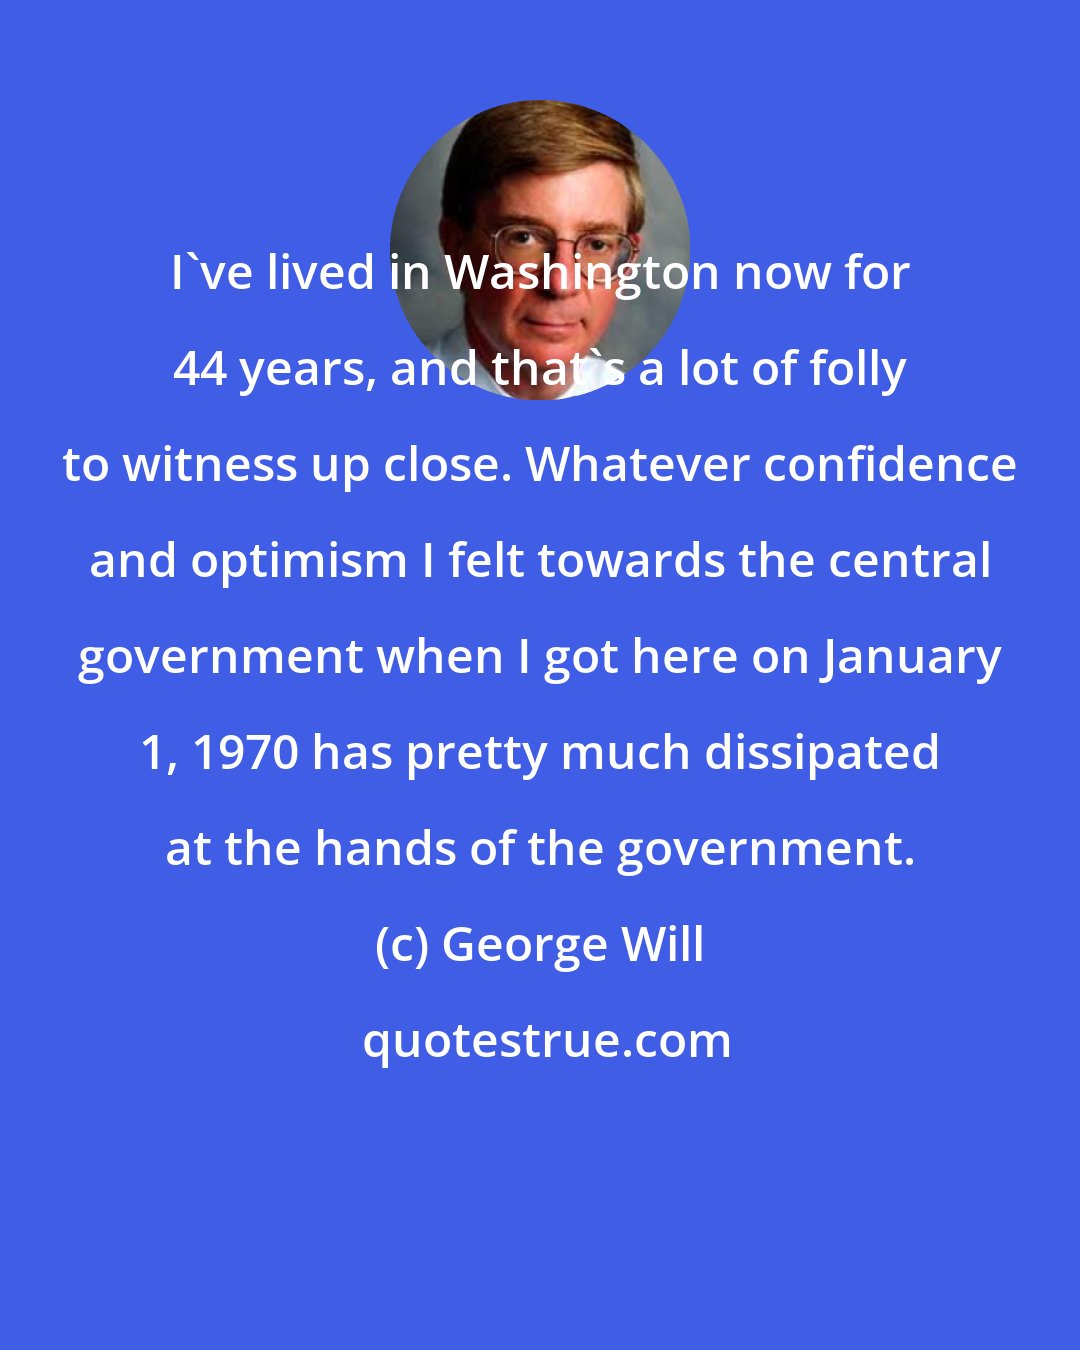 George Will: I've lived in Washington now for 44 years, and that's a lot of folly to witness up close. Whatever confidence and optimism I felt towards the central government when I got here on January 1, 1970 has pretty much dissipated at the hands of the government.